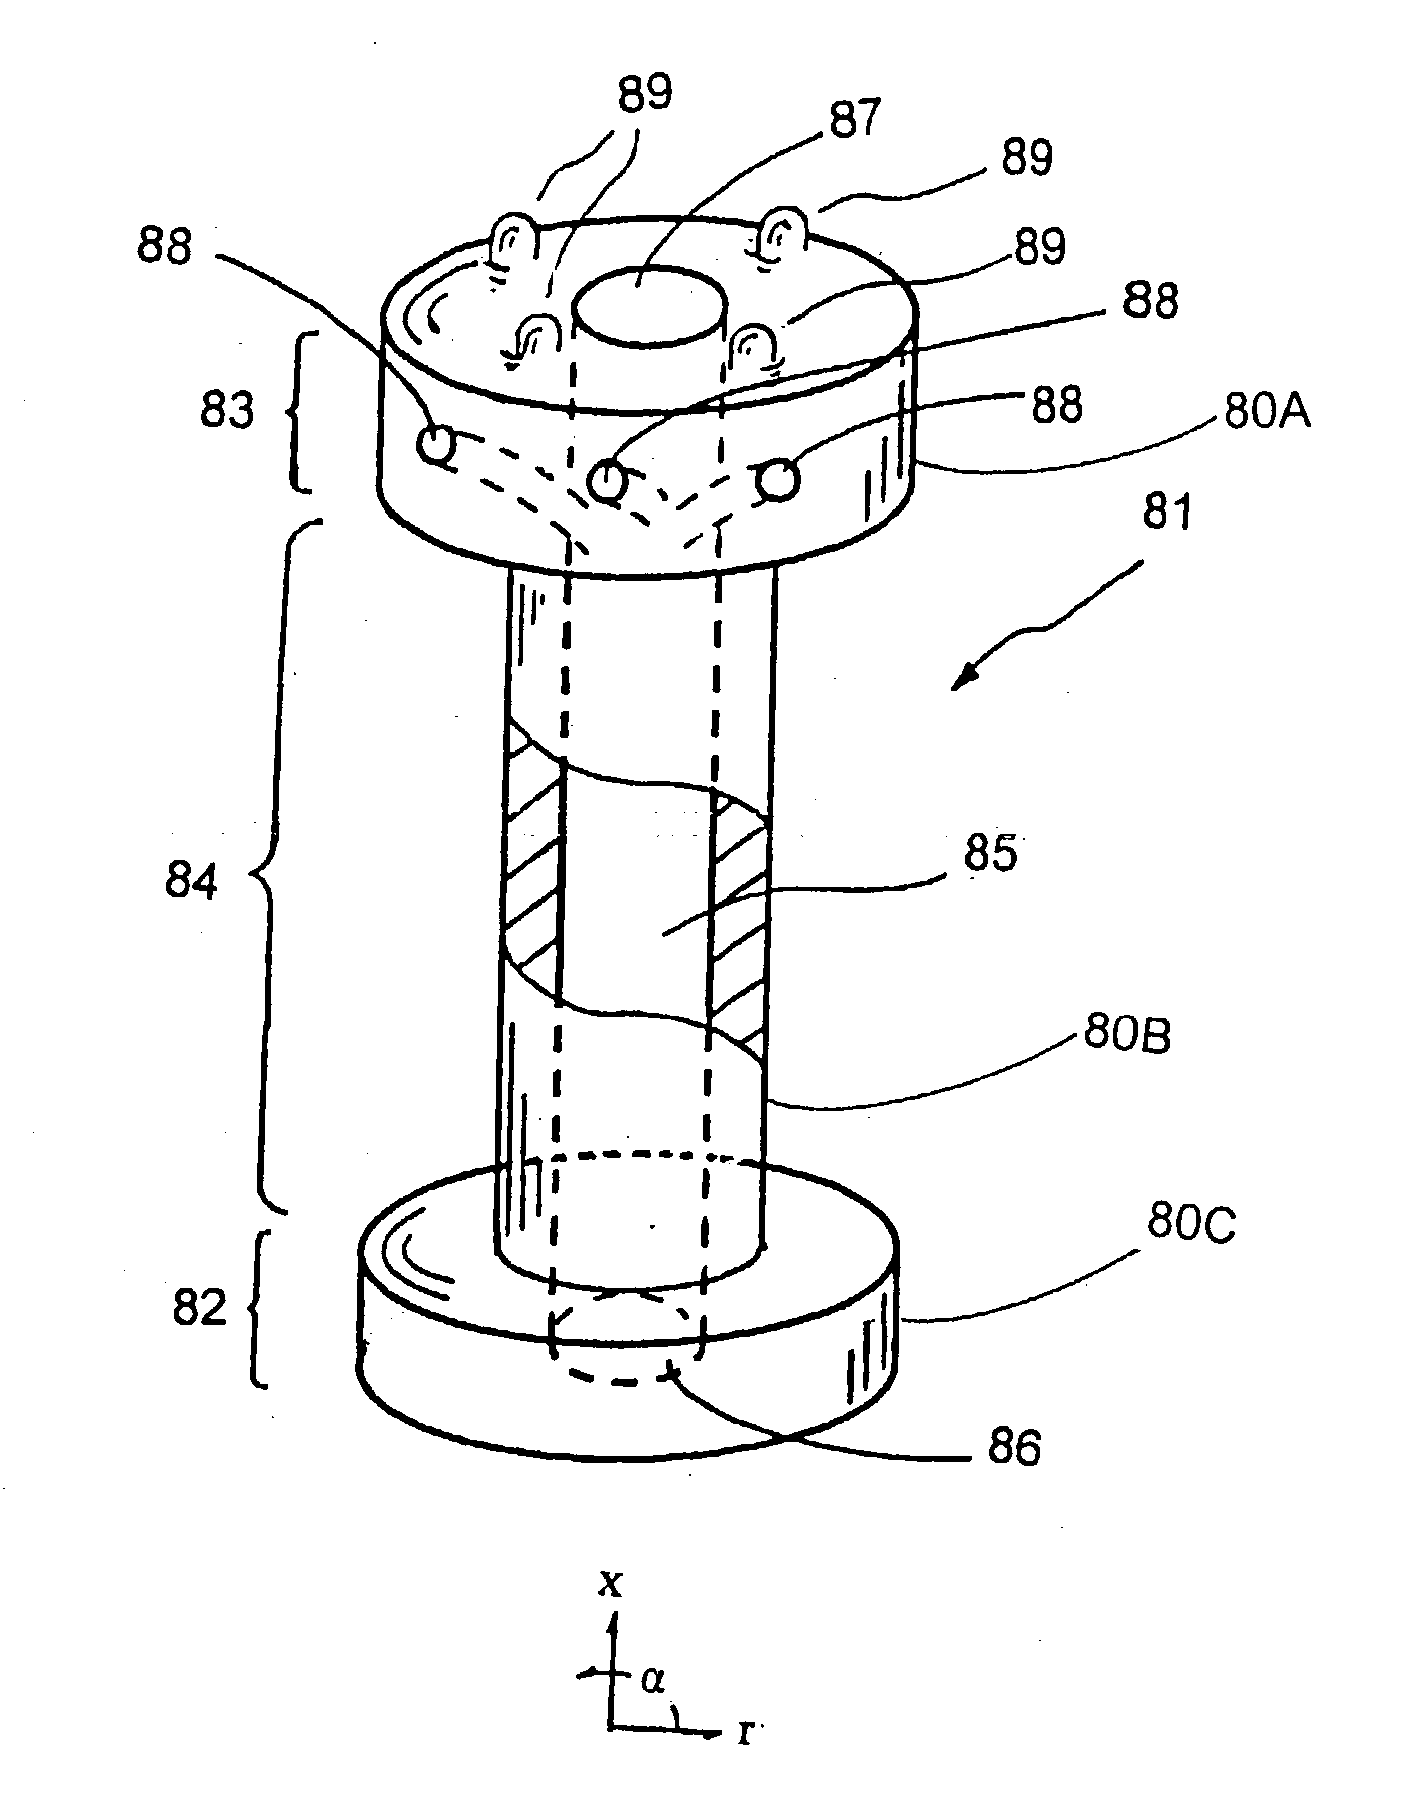 Expandable glaucoma implant and methods of use